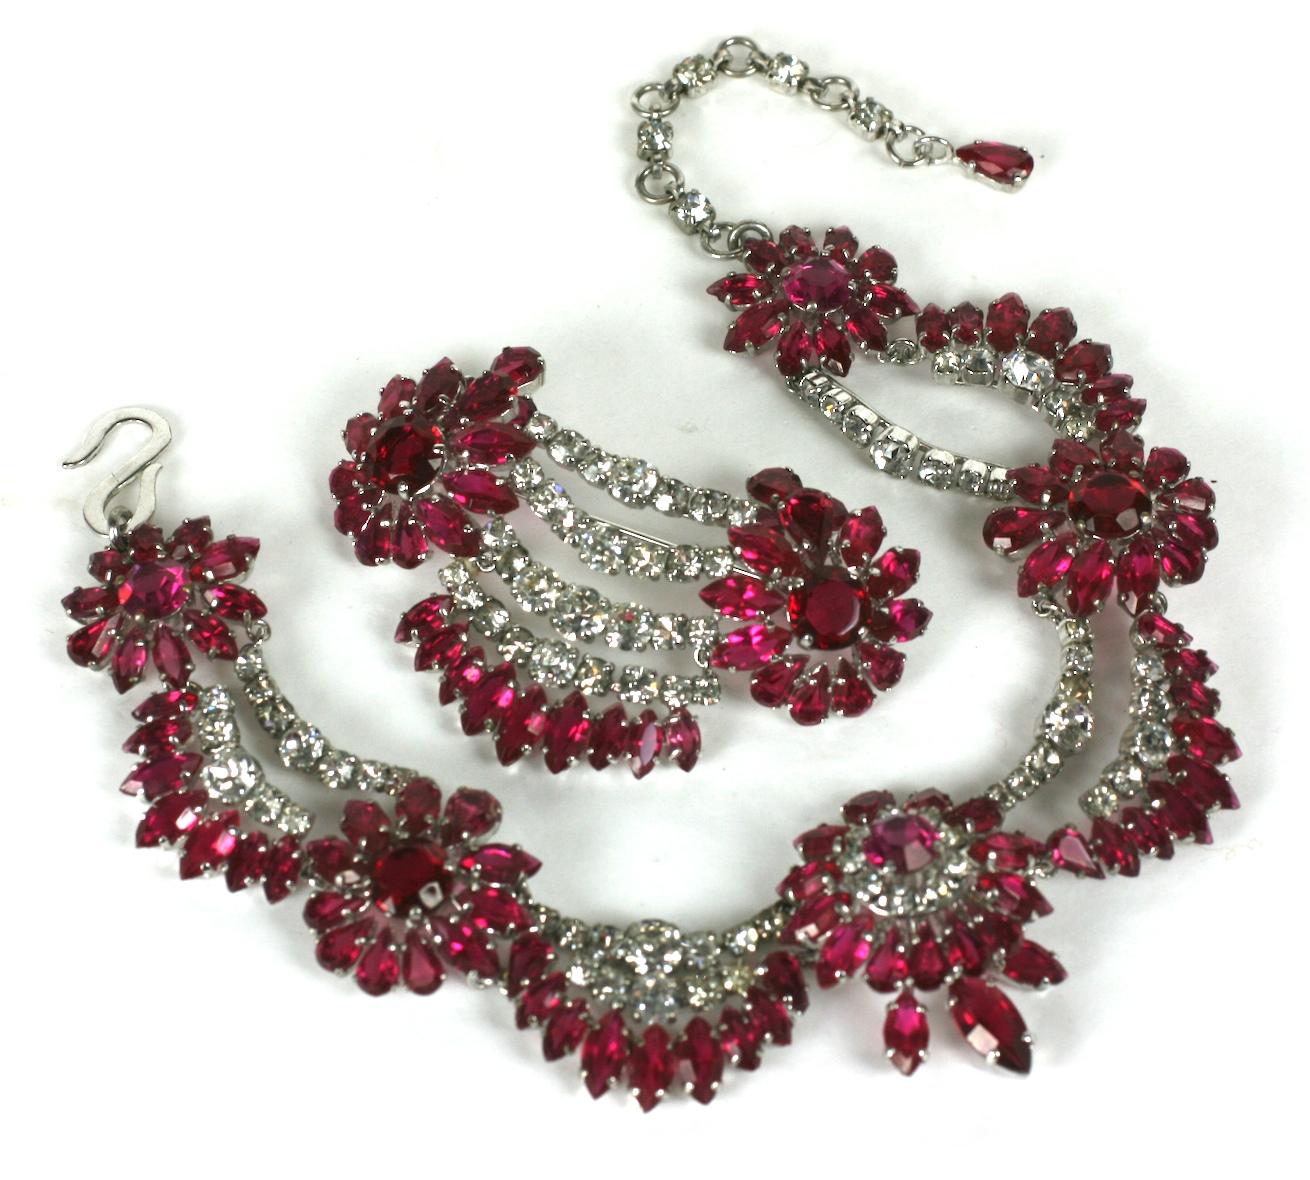 Incredibly Rare Christian Dior suite designed by Yves Saint Laurent  in 1959. Ruby and Crystal Edwardian inspired Floral swag parure consisting of a five sectioned draped adjustable choker necklace of five flower heads, an articulated brooch and